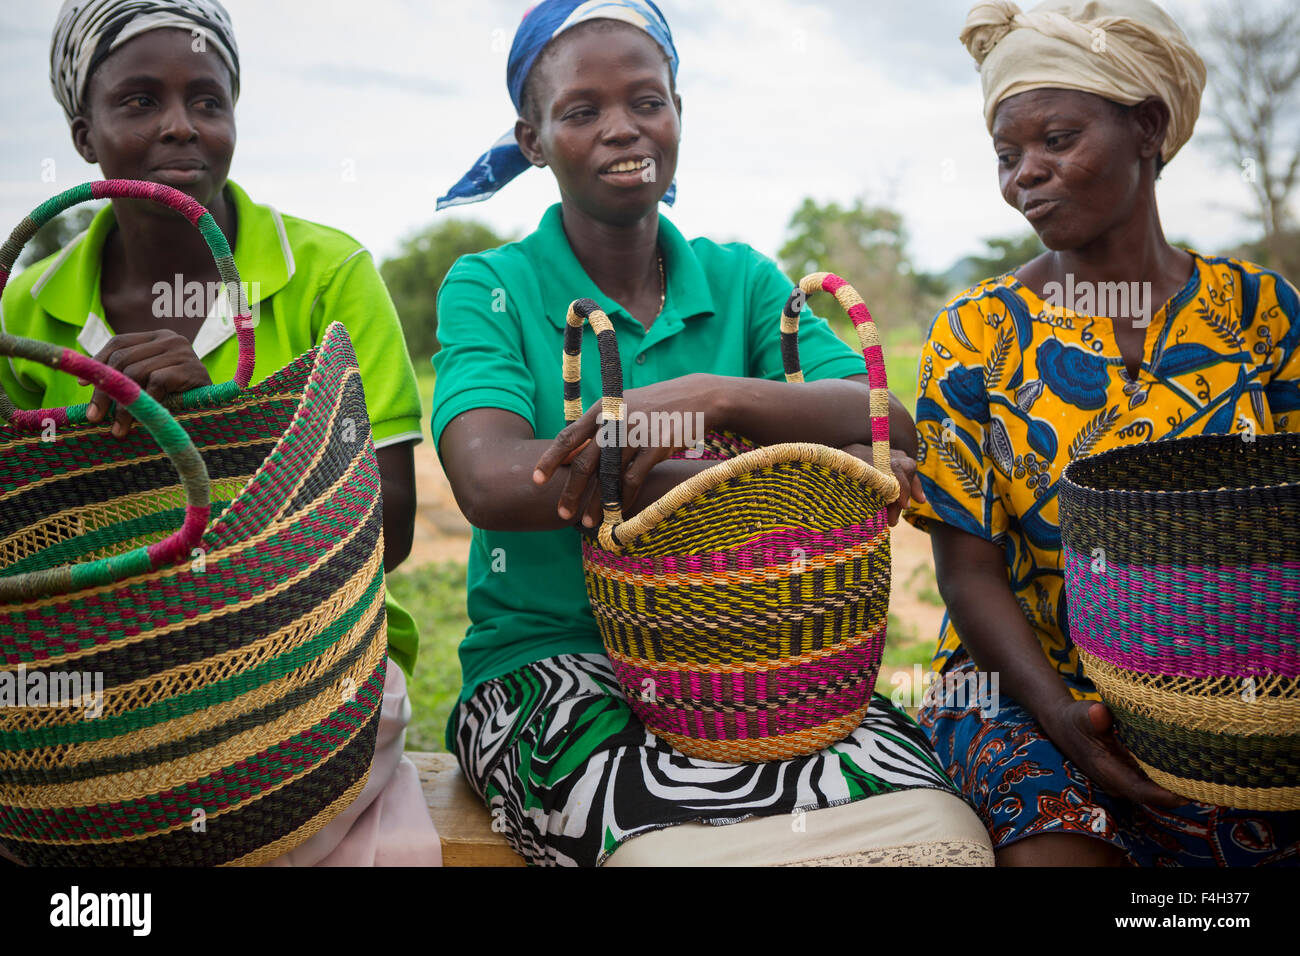 Fair trade, ornate straw baskets are woven by the women of Asungtaaba Basket Weavers Group in Bolgatanga District, Ghana. Stock Photo